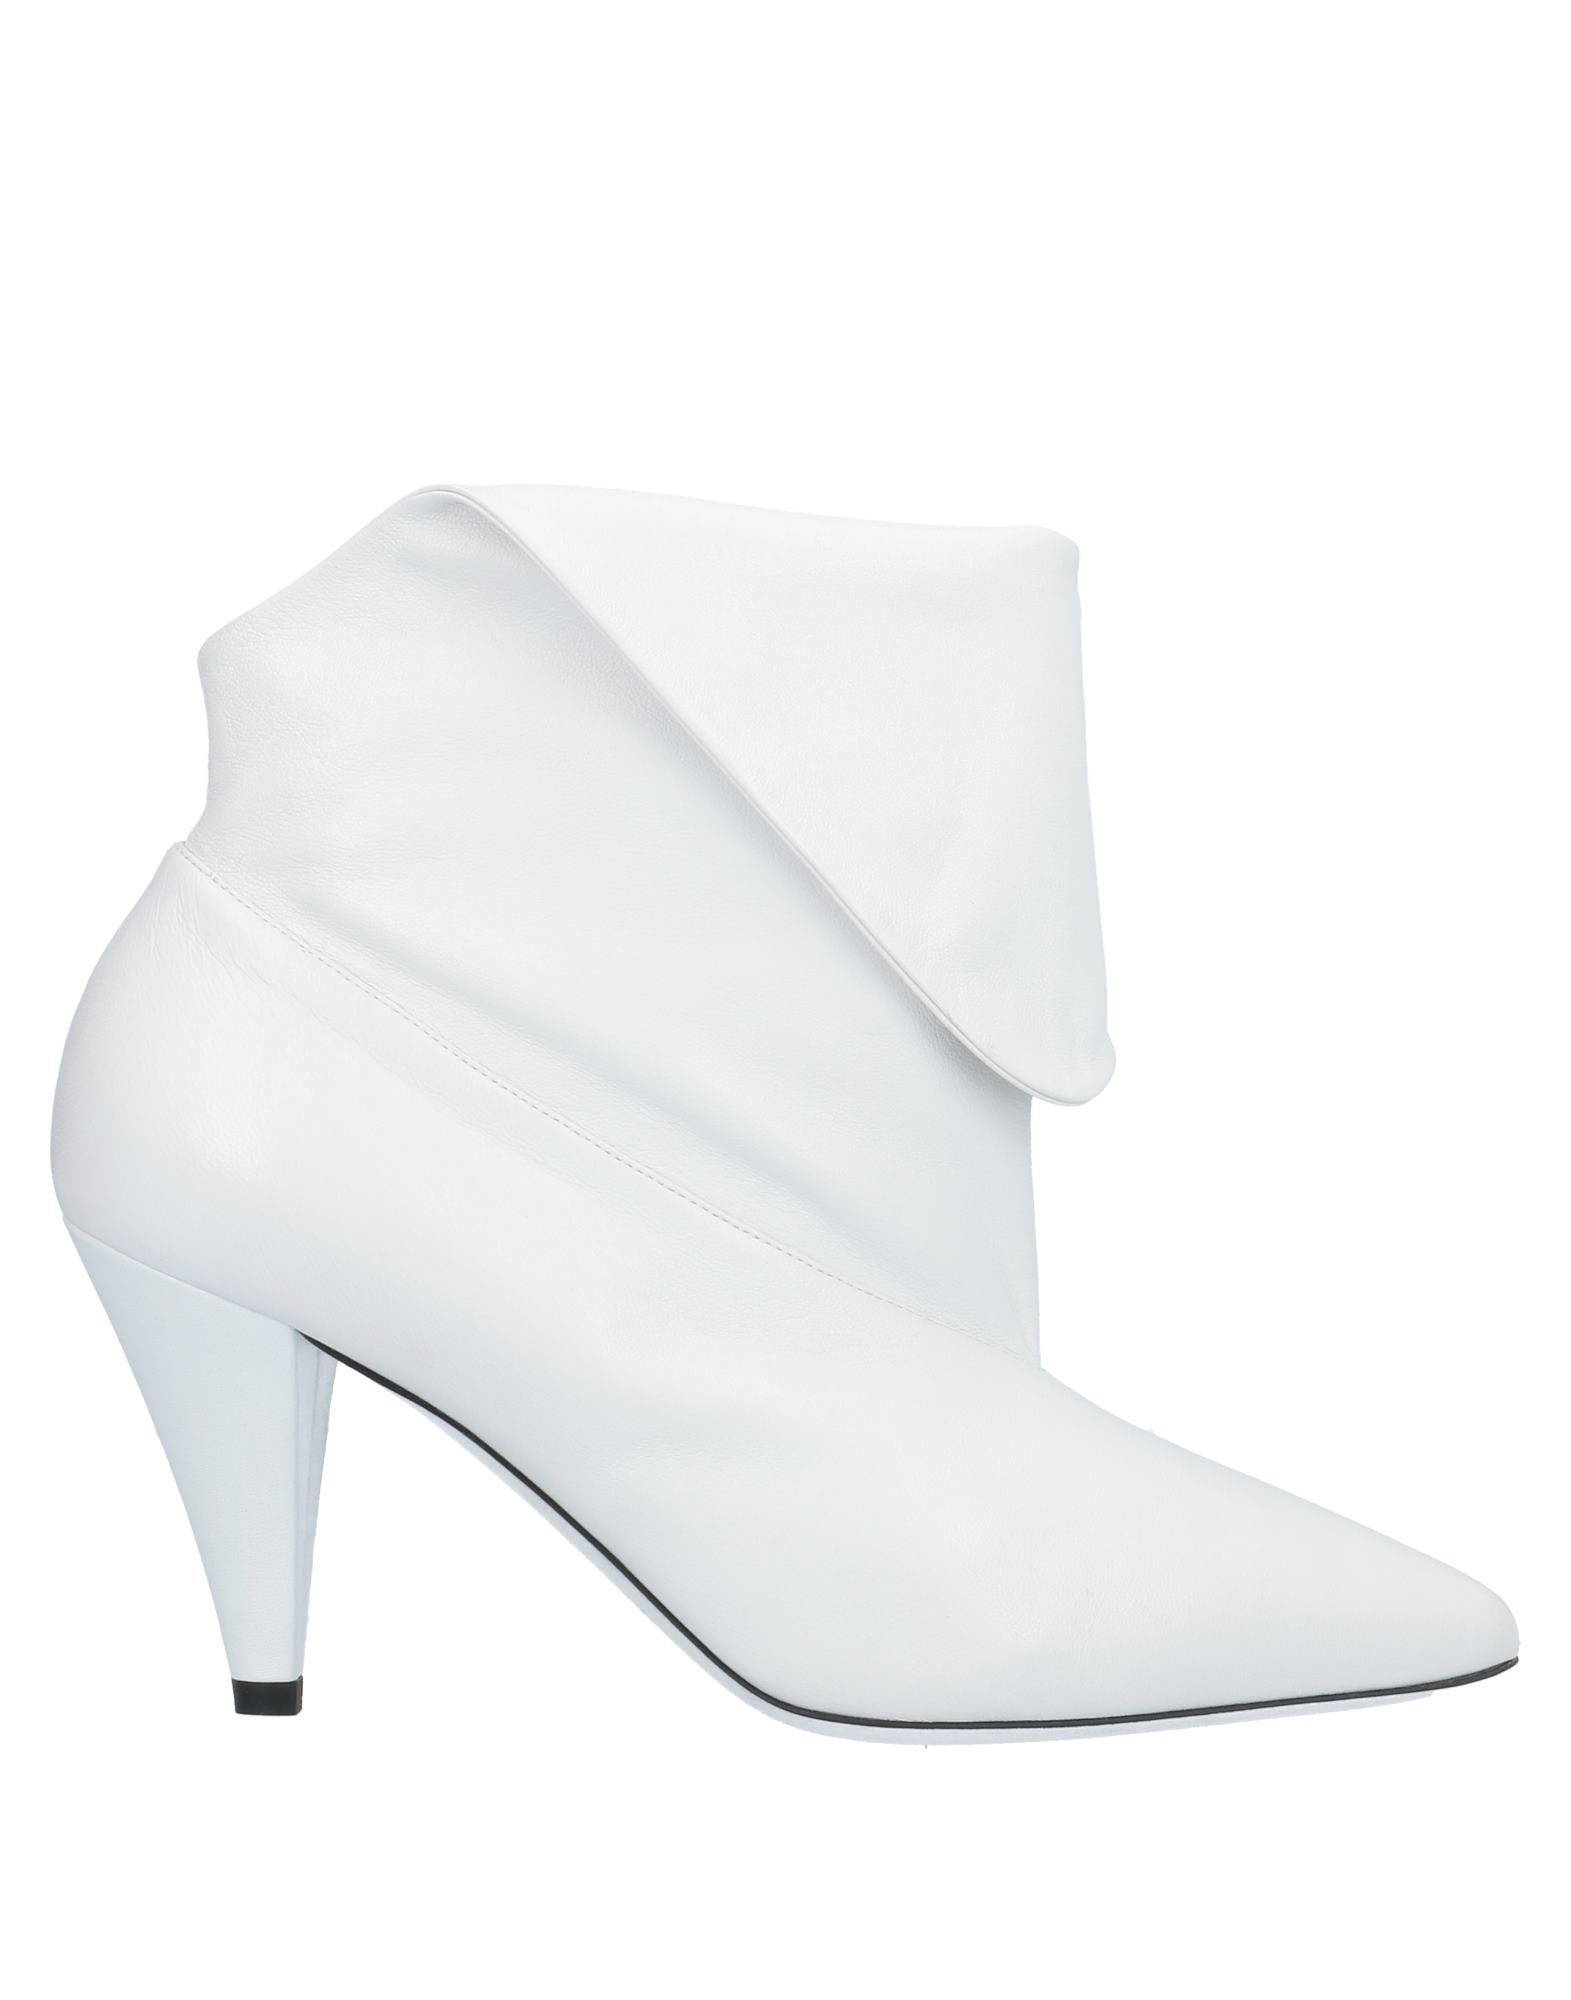 givenchy white boots